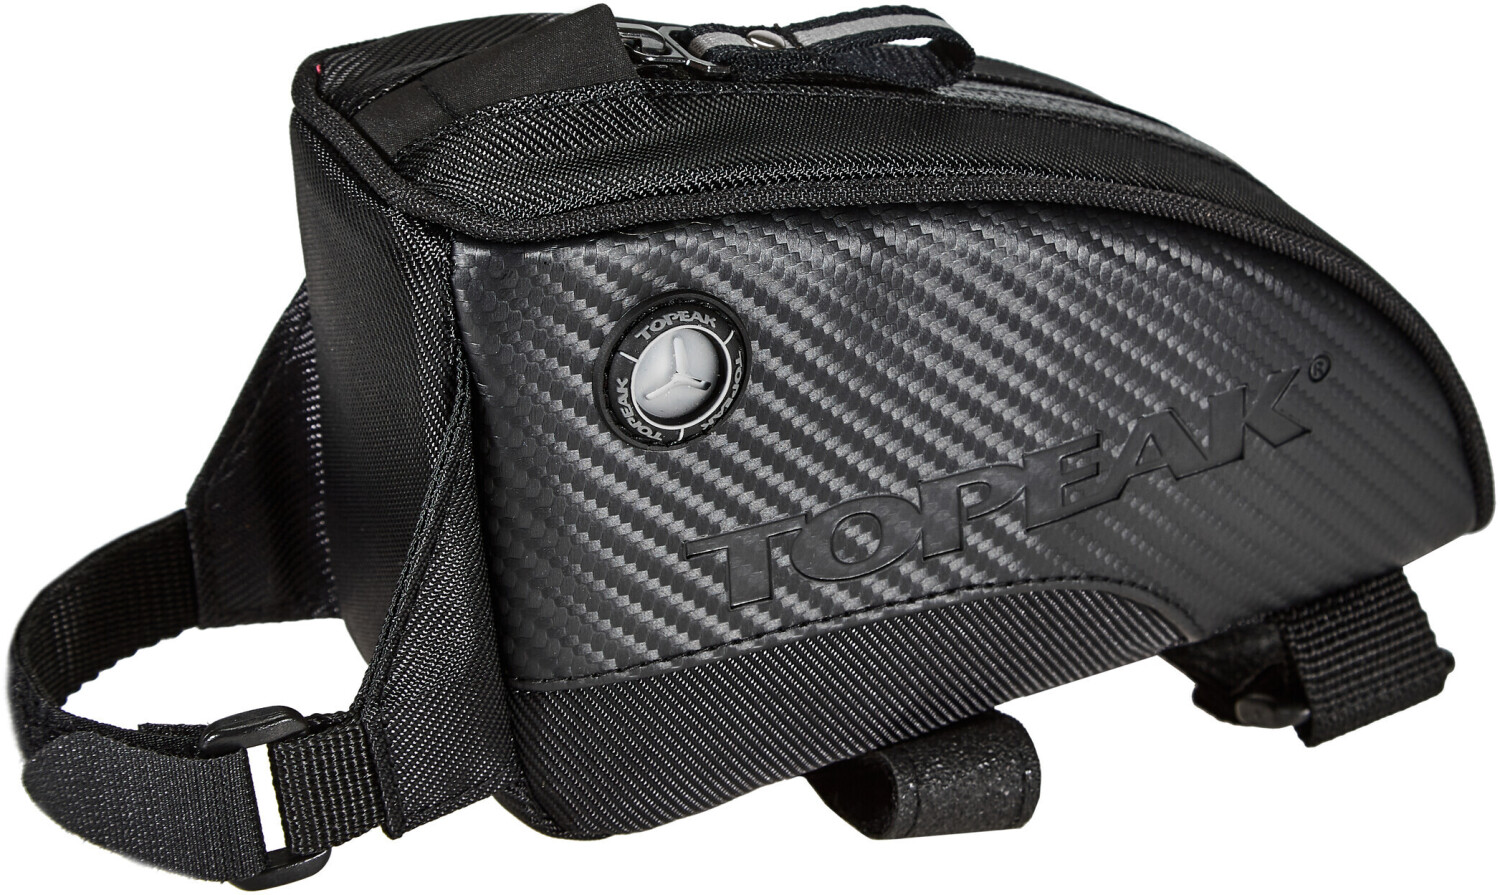 Buy Topeak Fuel Tank Frame Bag M from £25.99 (Today) – Best Deals